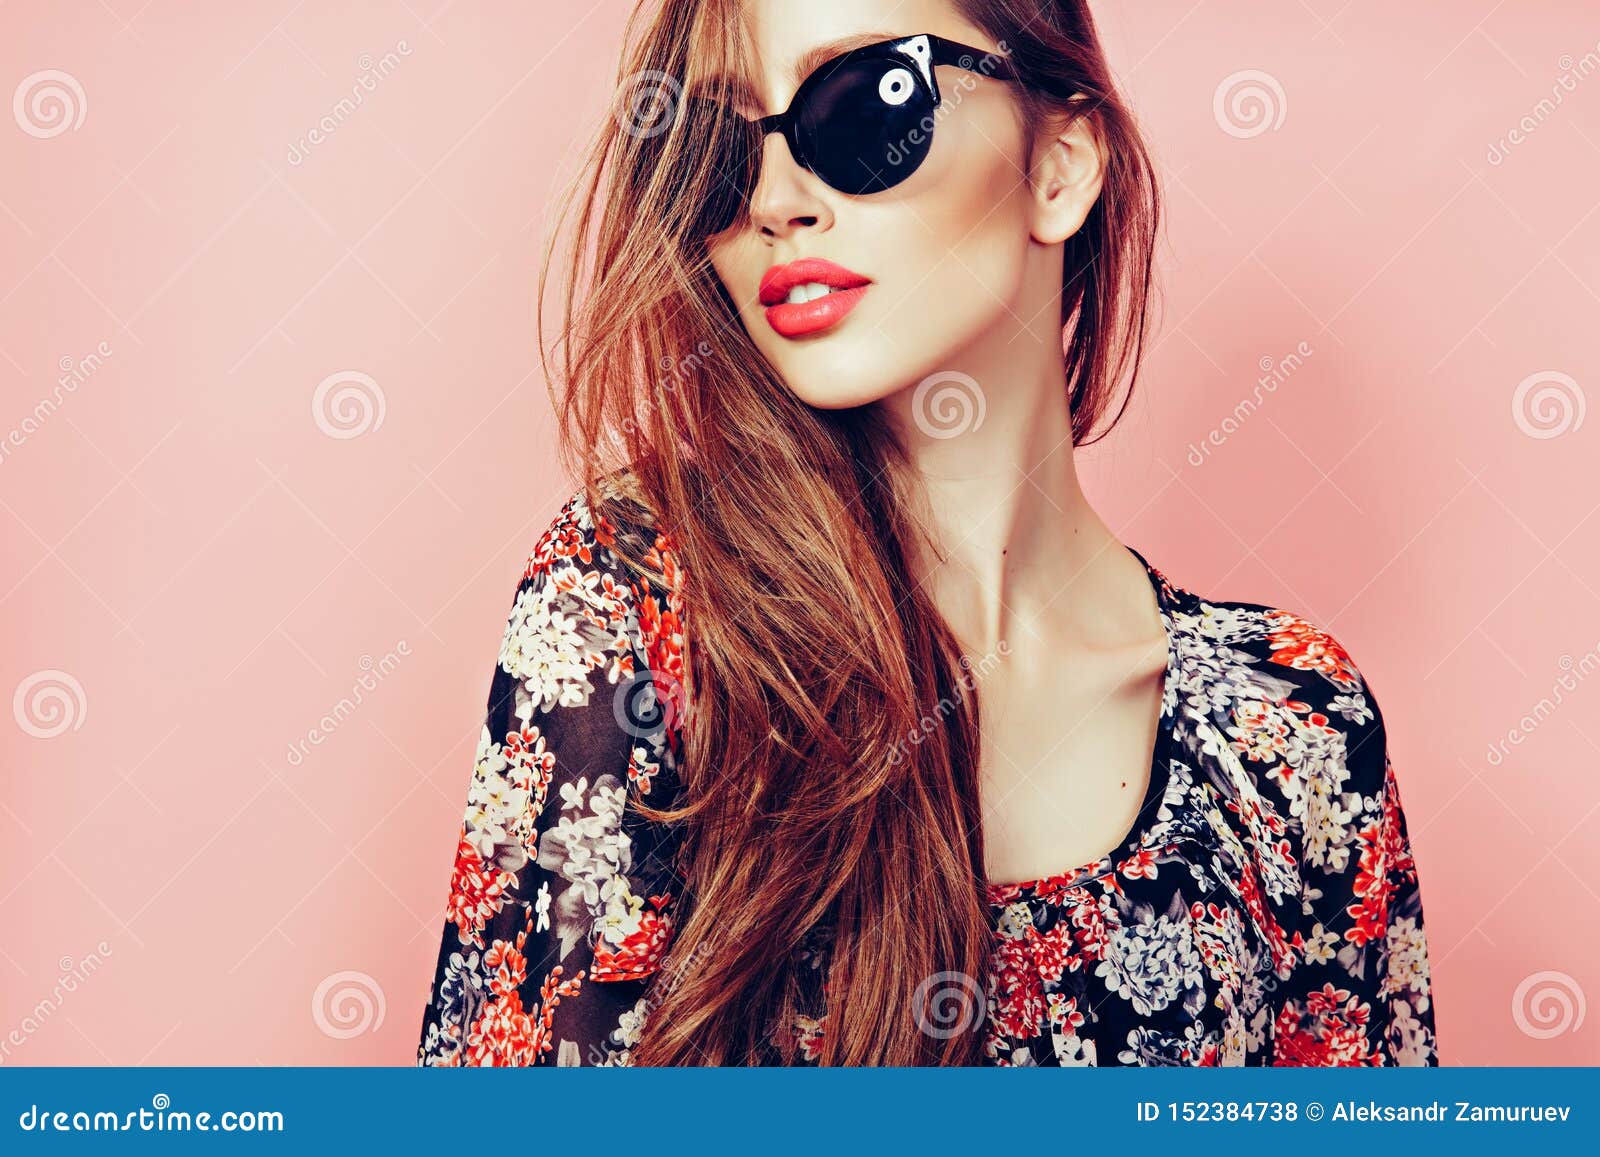 Portrait of Young Beautiful Slim Woman in Dress with Sensual Lips in ...